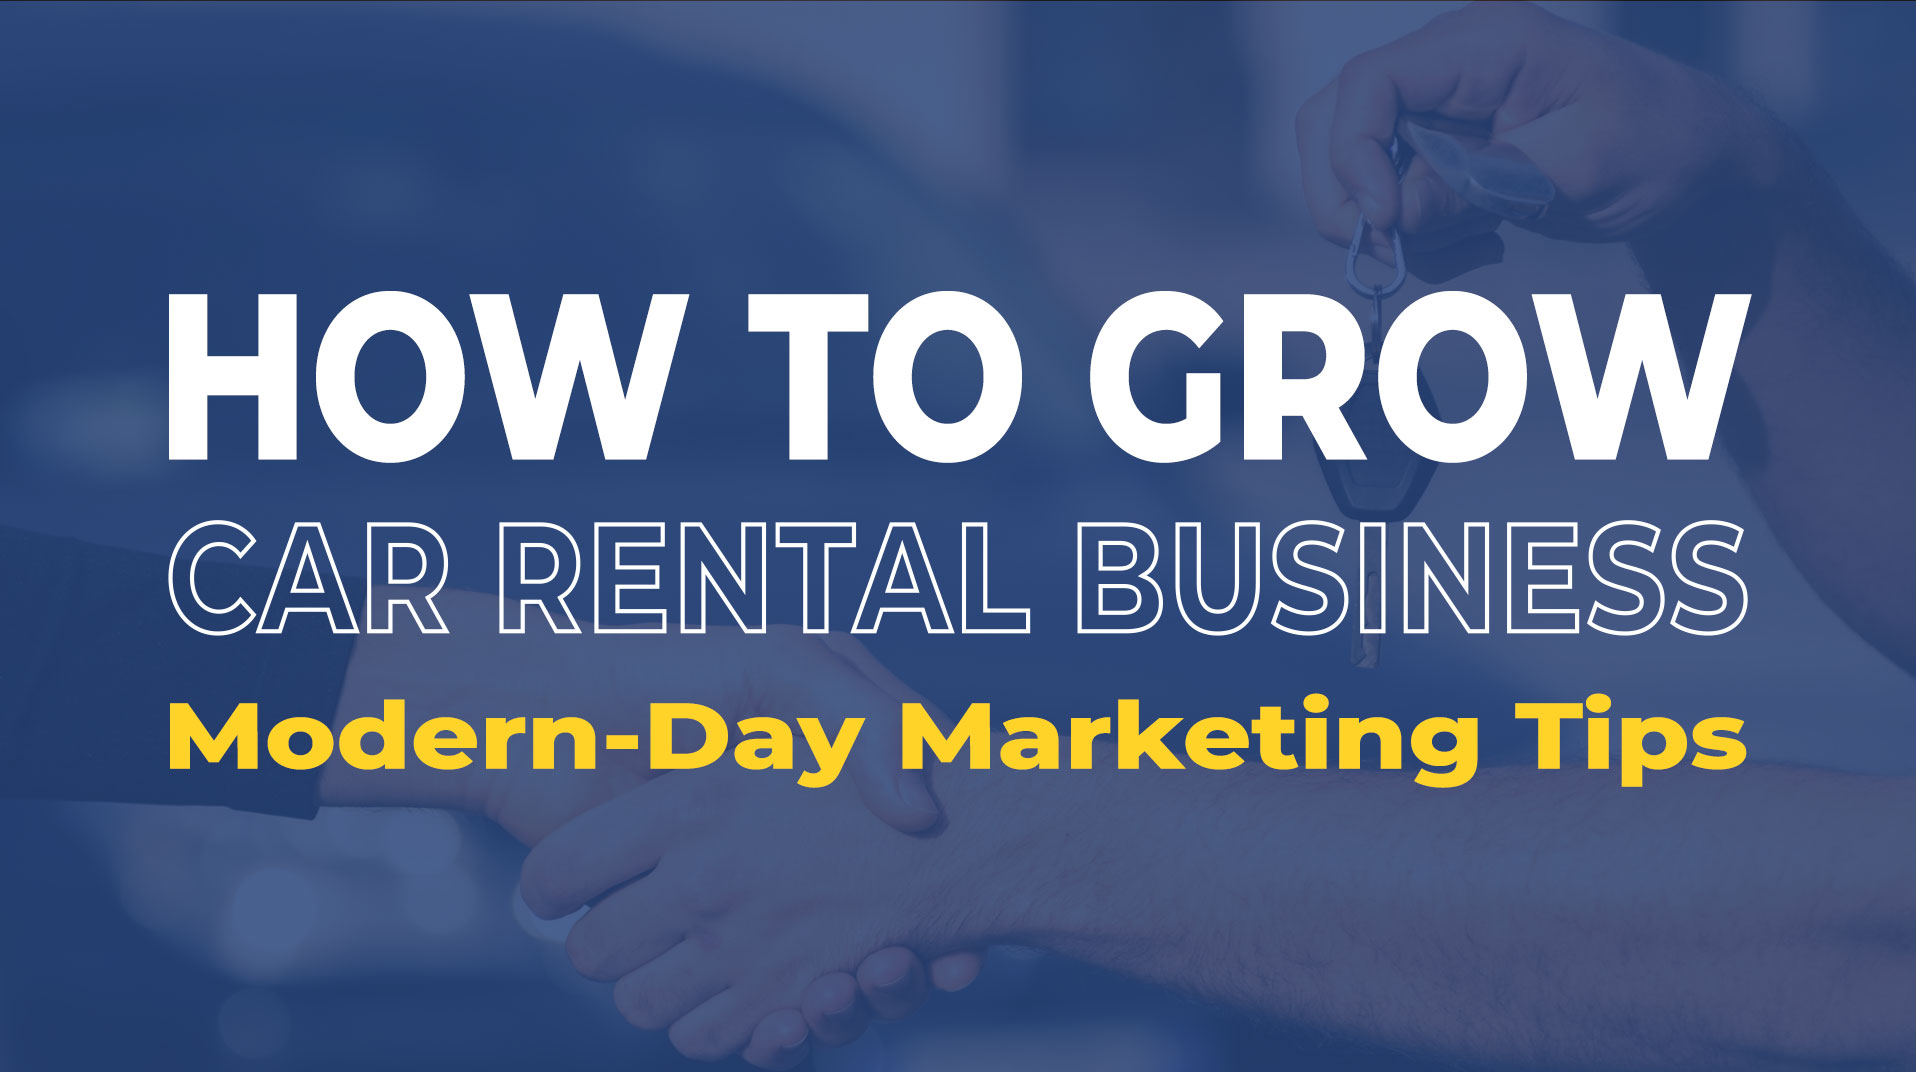 How to Grow Your Car Rental Business